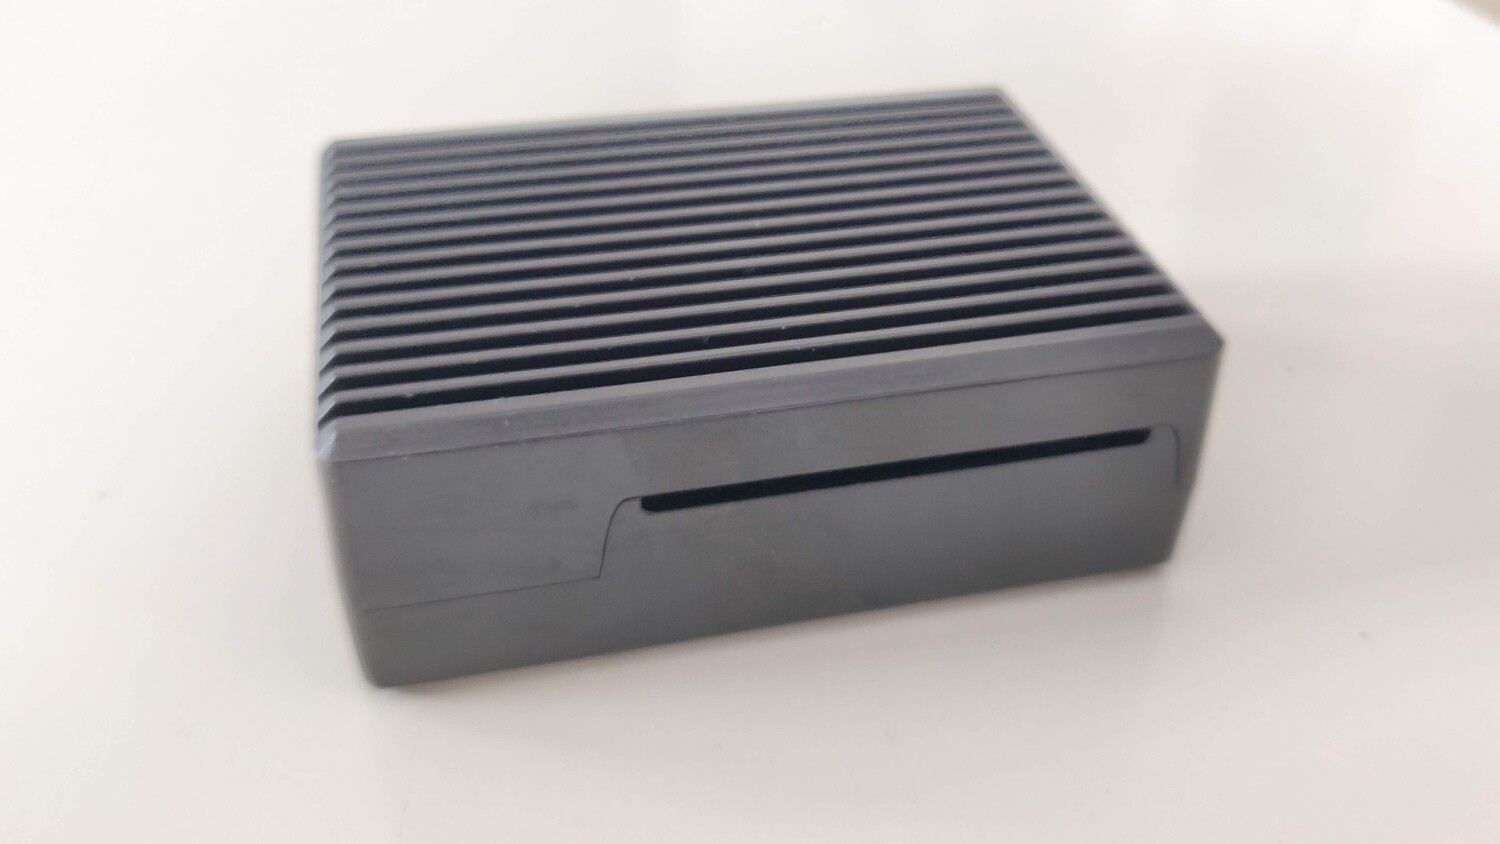 Aluminium Case for Pi 4 with built-in heat sink